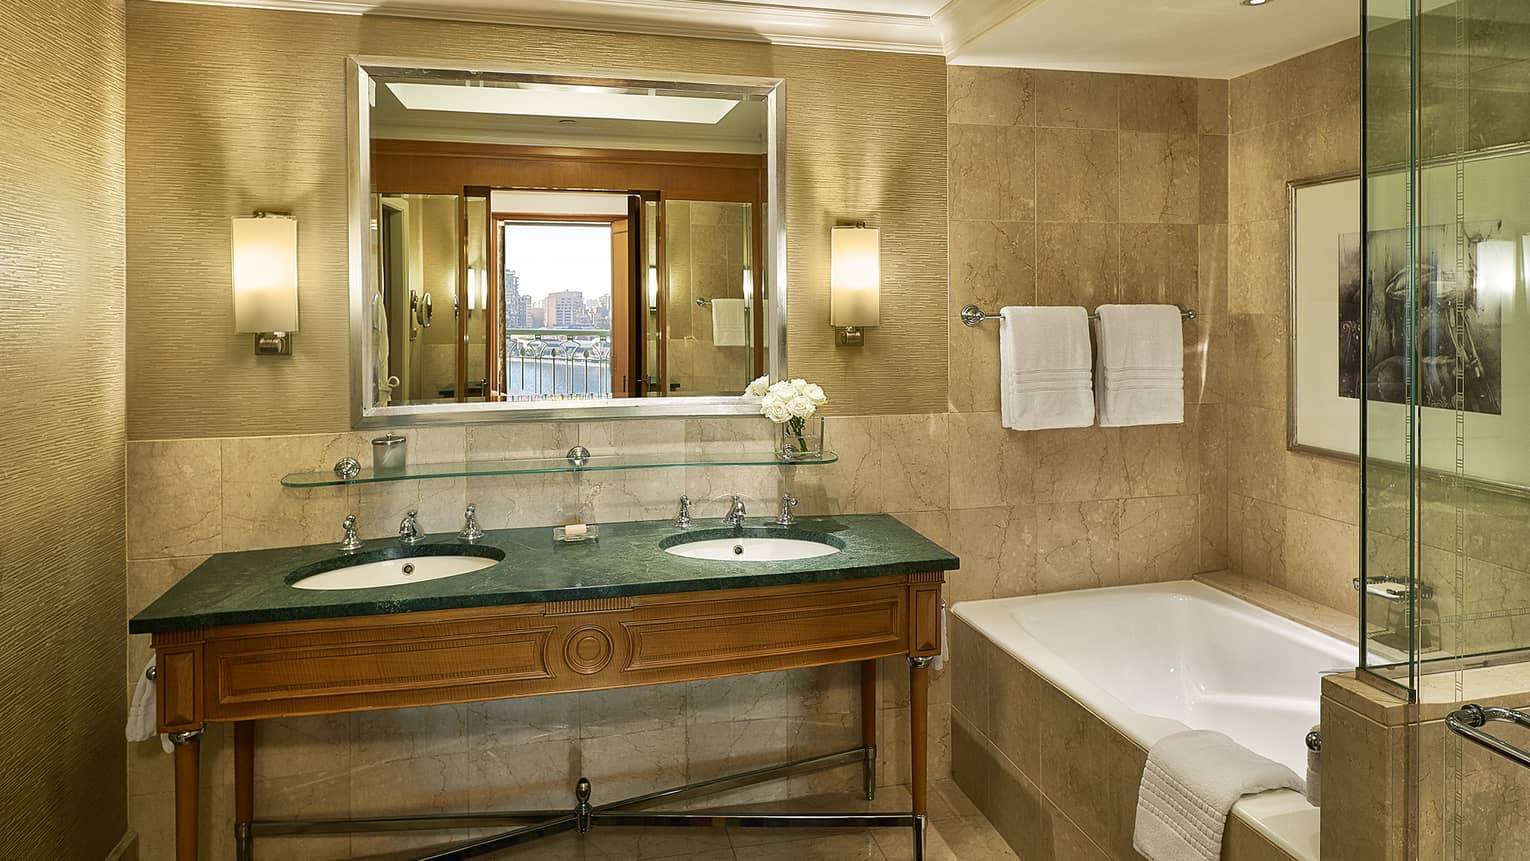 Guest room bathroom with double green granite?topped vanity, deep soaking tub,  mirror flanked by lighted wall sconces, glass shower